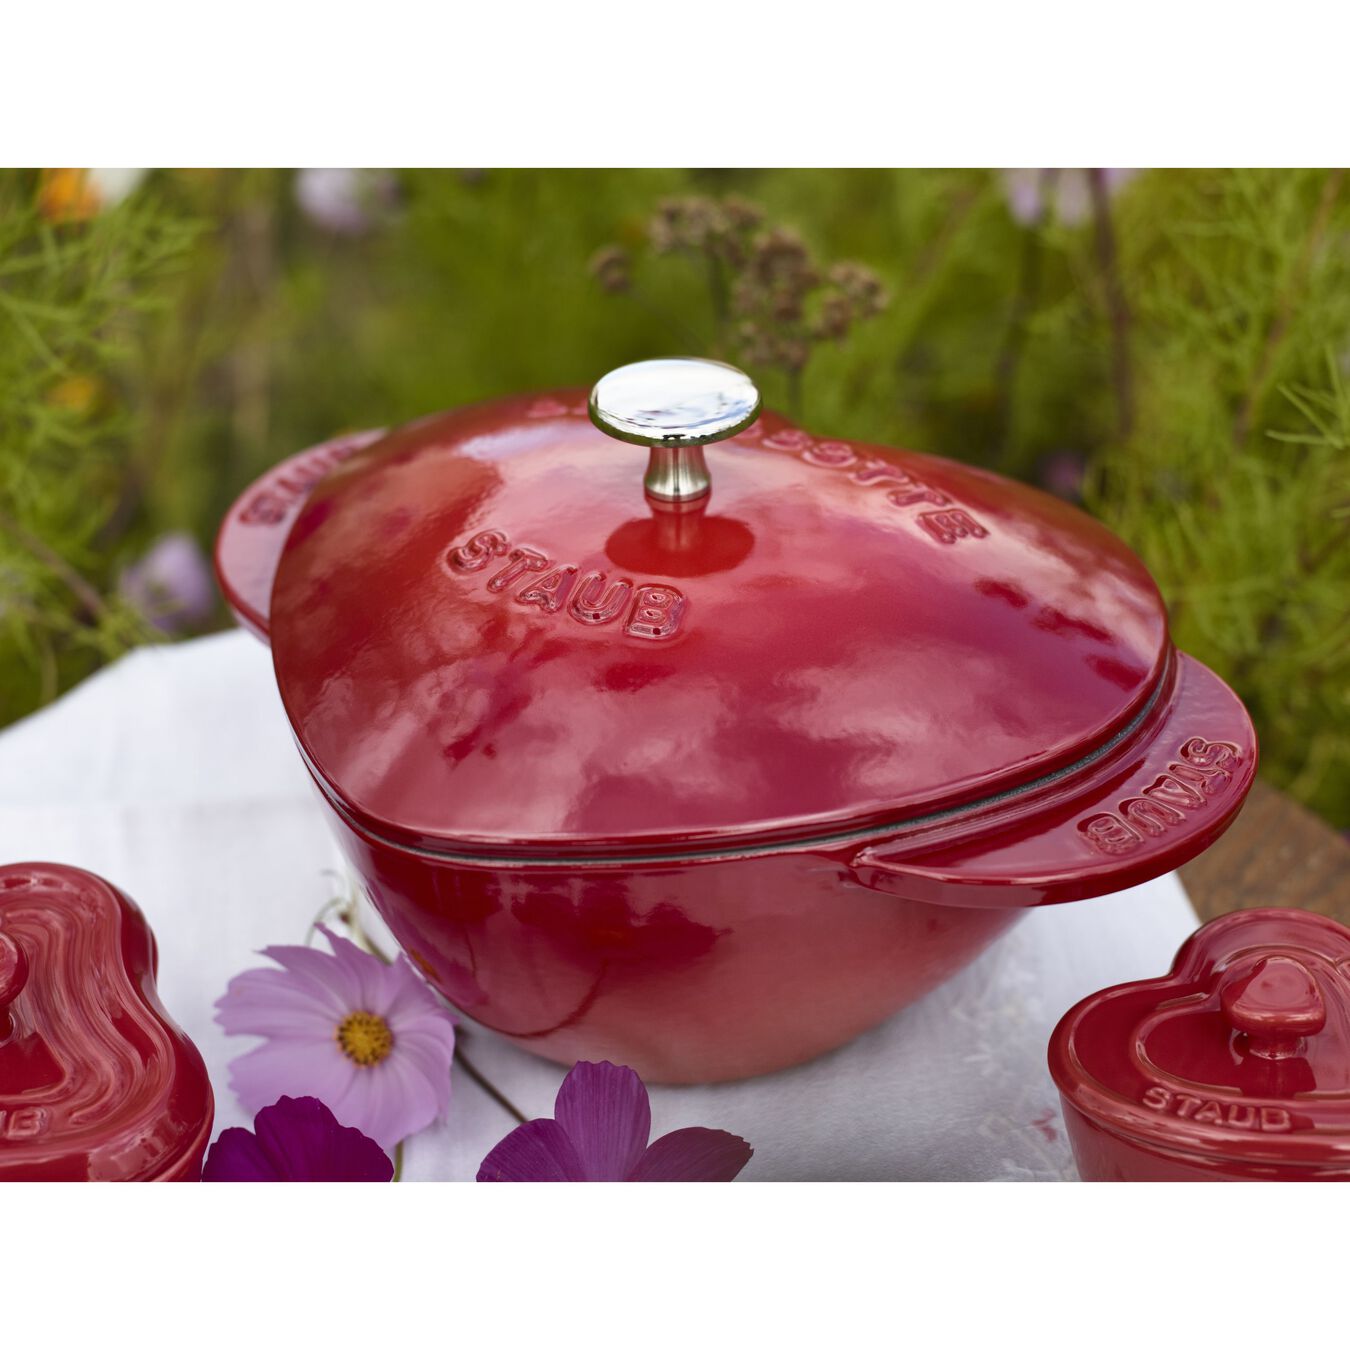 Cocotte 20 cm, Herz, Kirsch-Rot, Gusseisen,,large 2